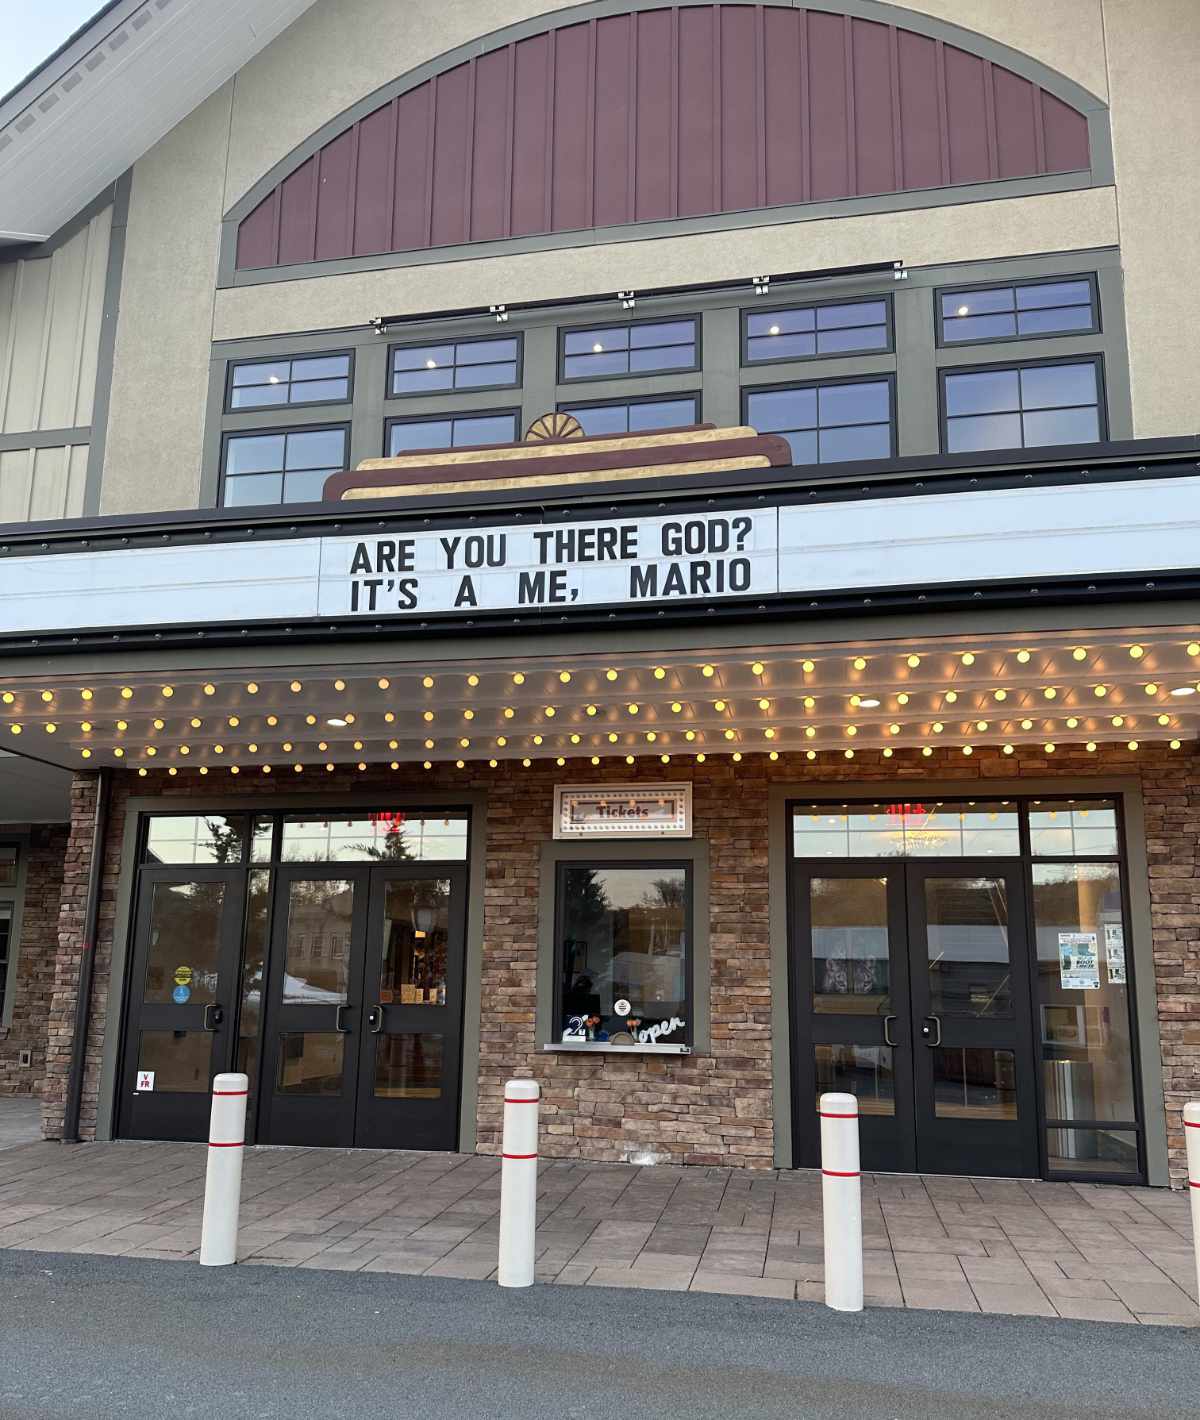 I think my local theater is a little confused